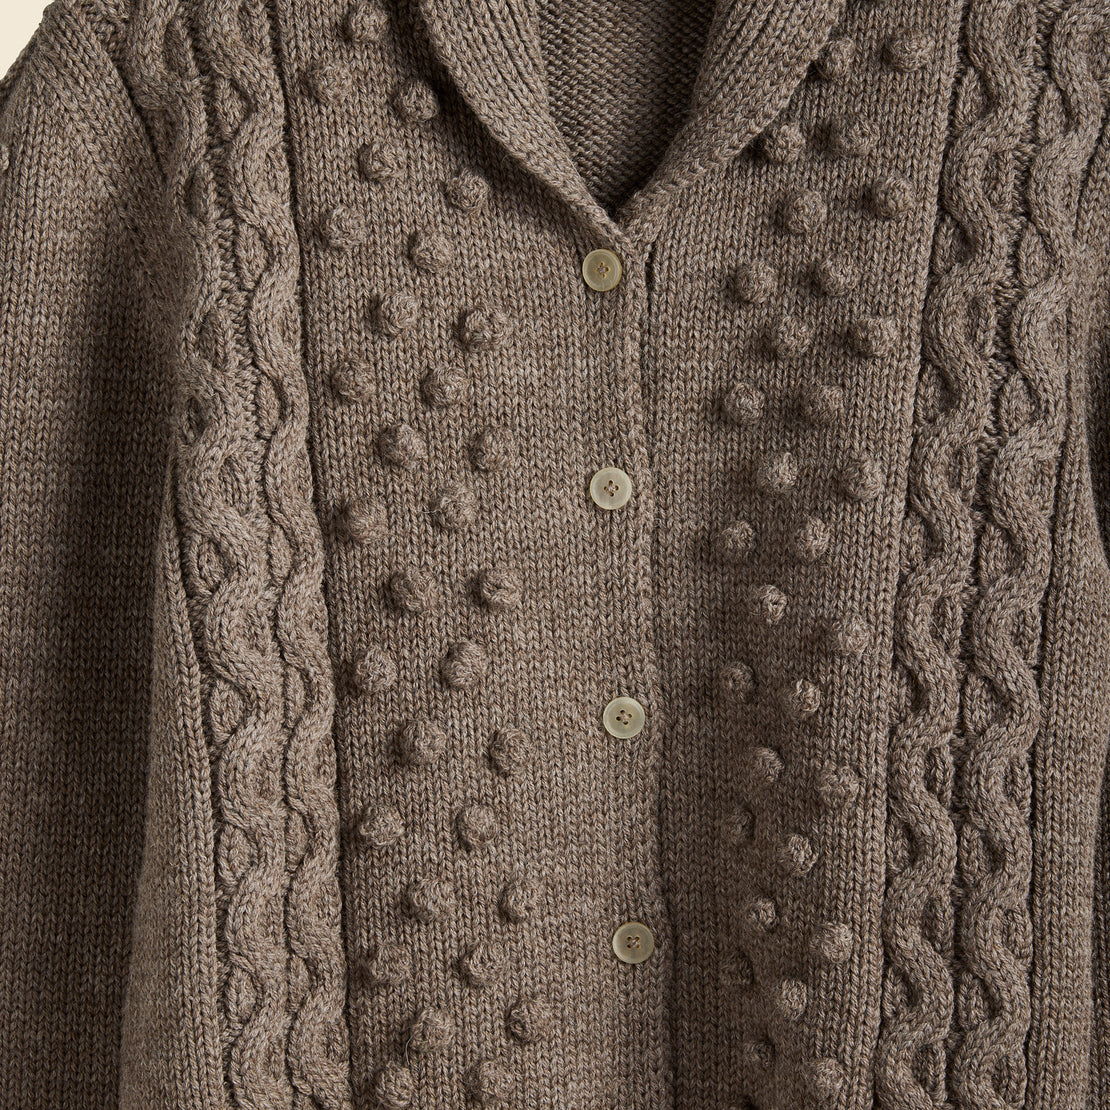 Bobble Cardigan - Bark - First Rite - STAG Provisions - W - Tops - Sweater